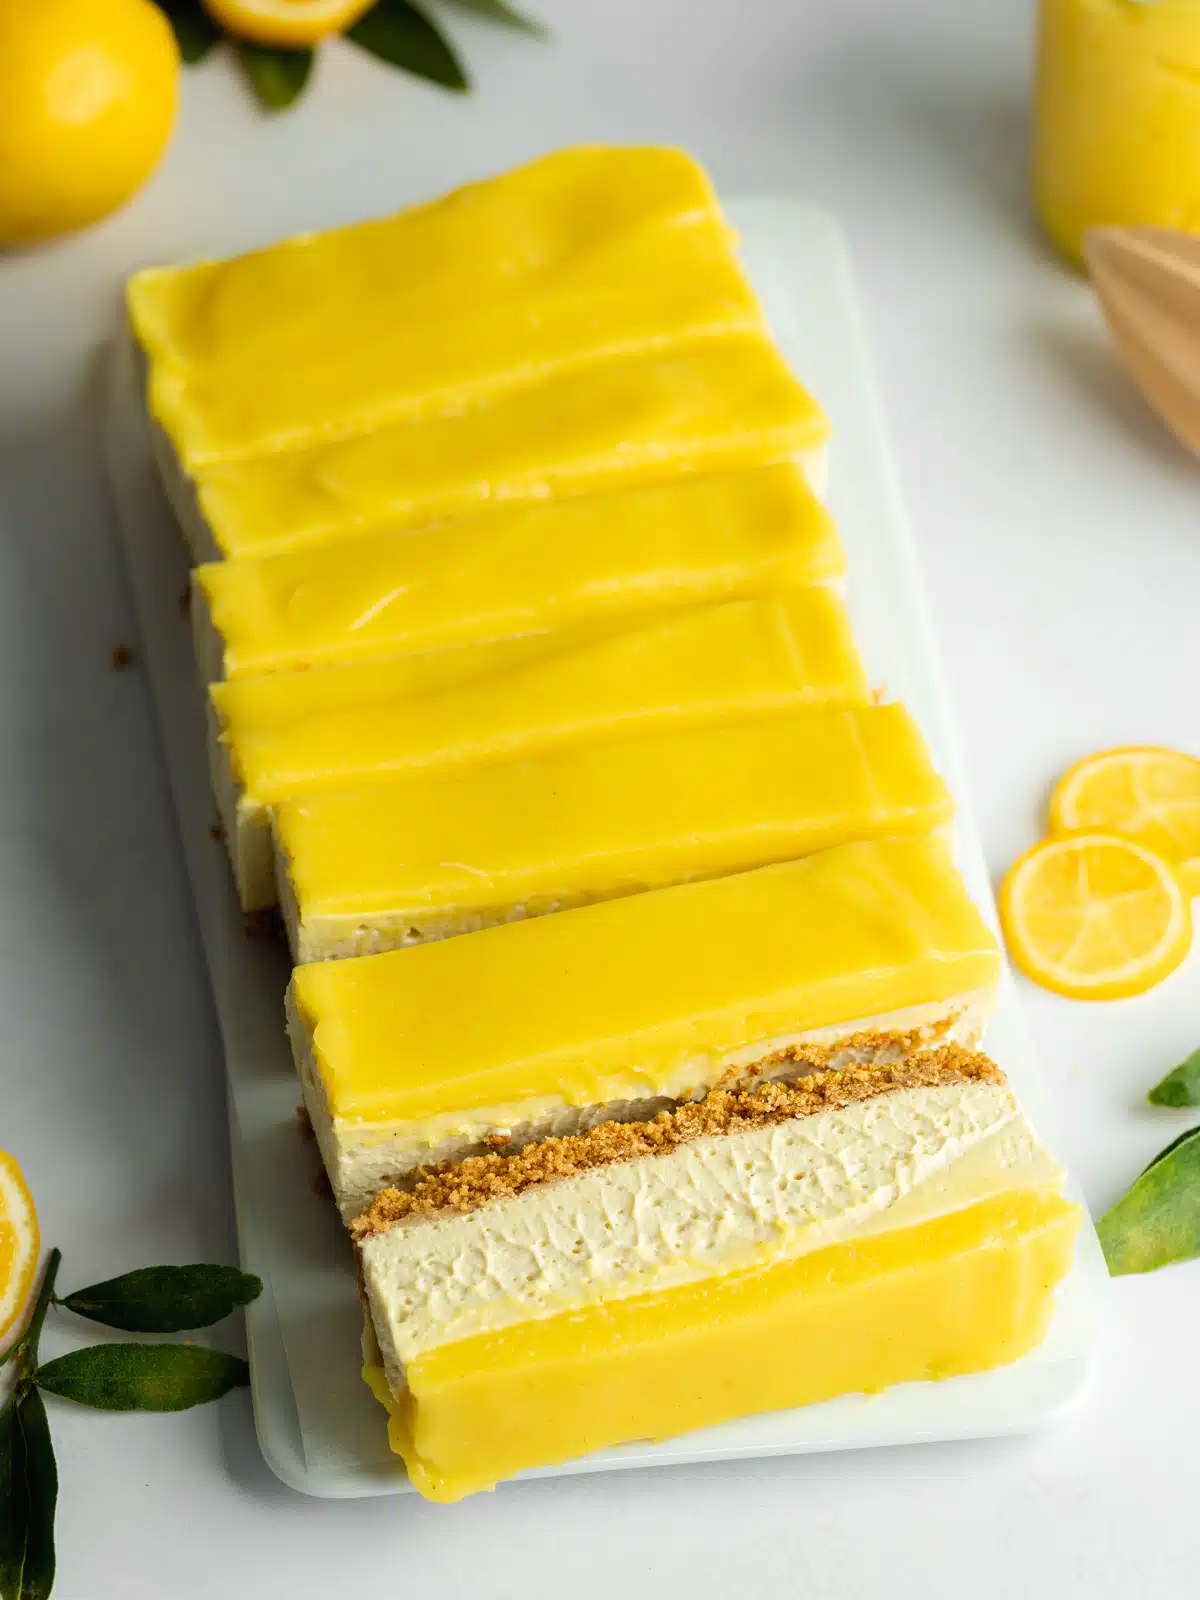 cheesecake with lemon curd topping thats been made in a loaf pan and cut into slices.